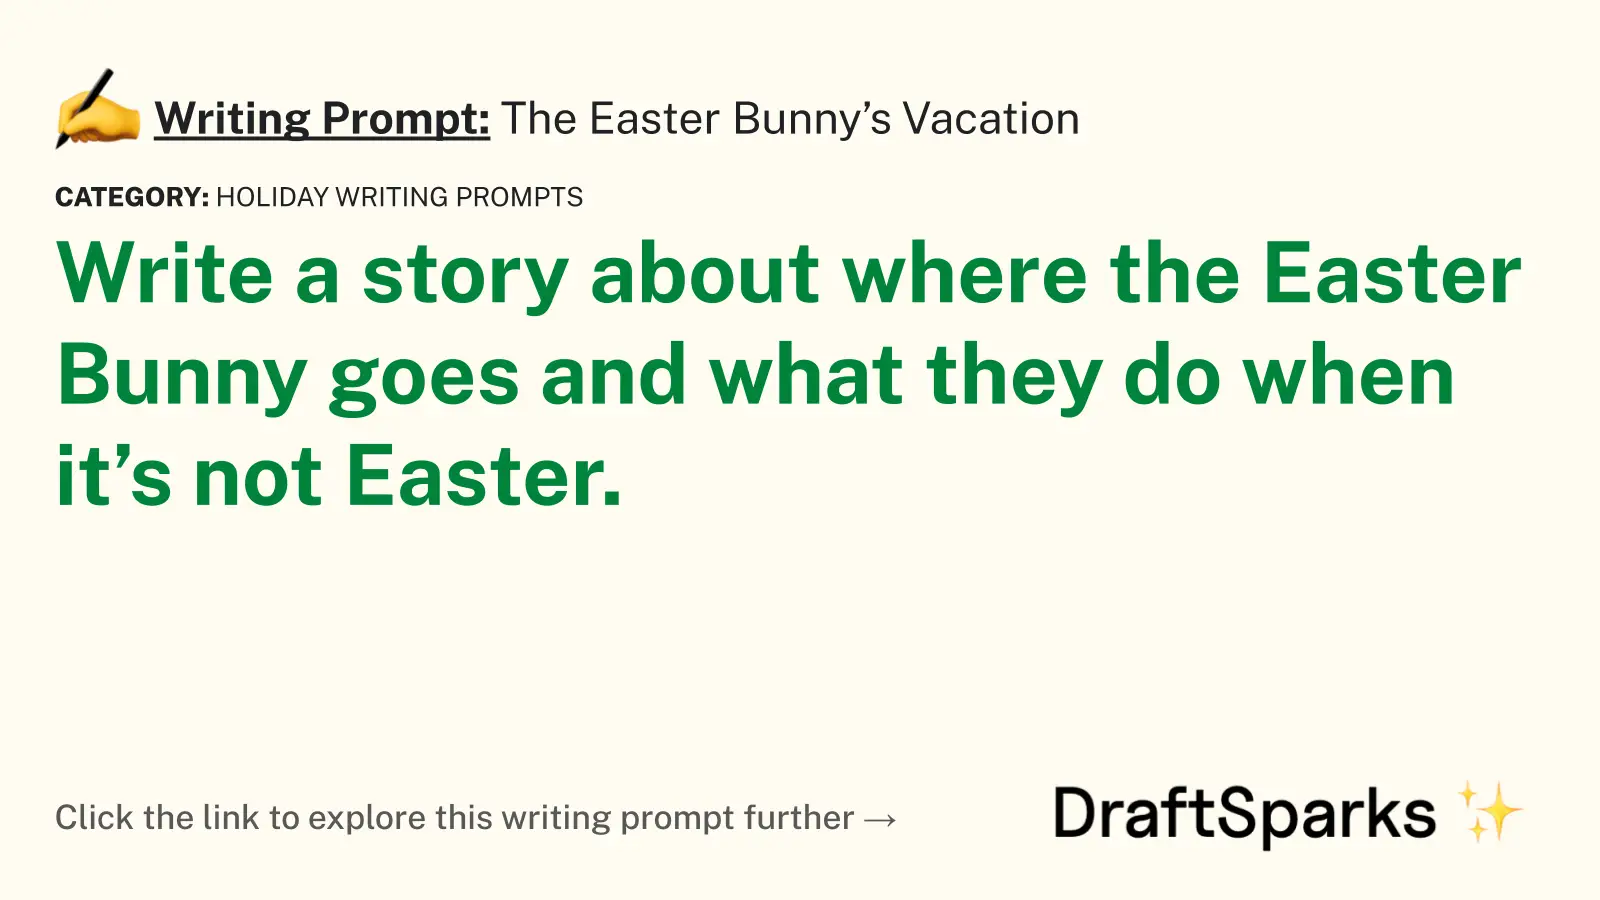 The Easter Bunny’s Vacation